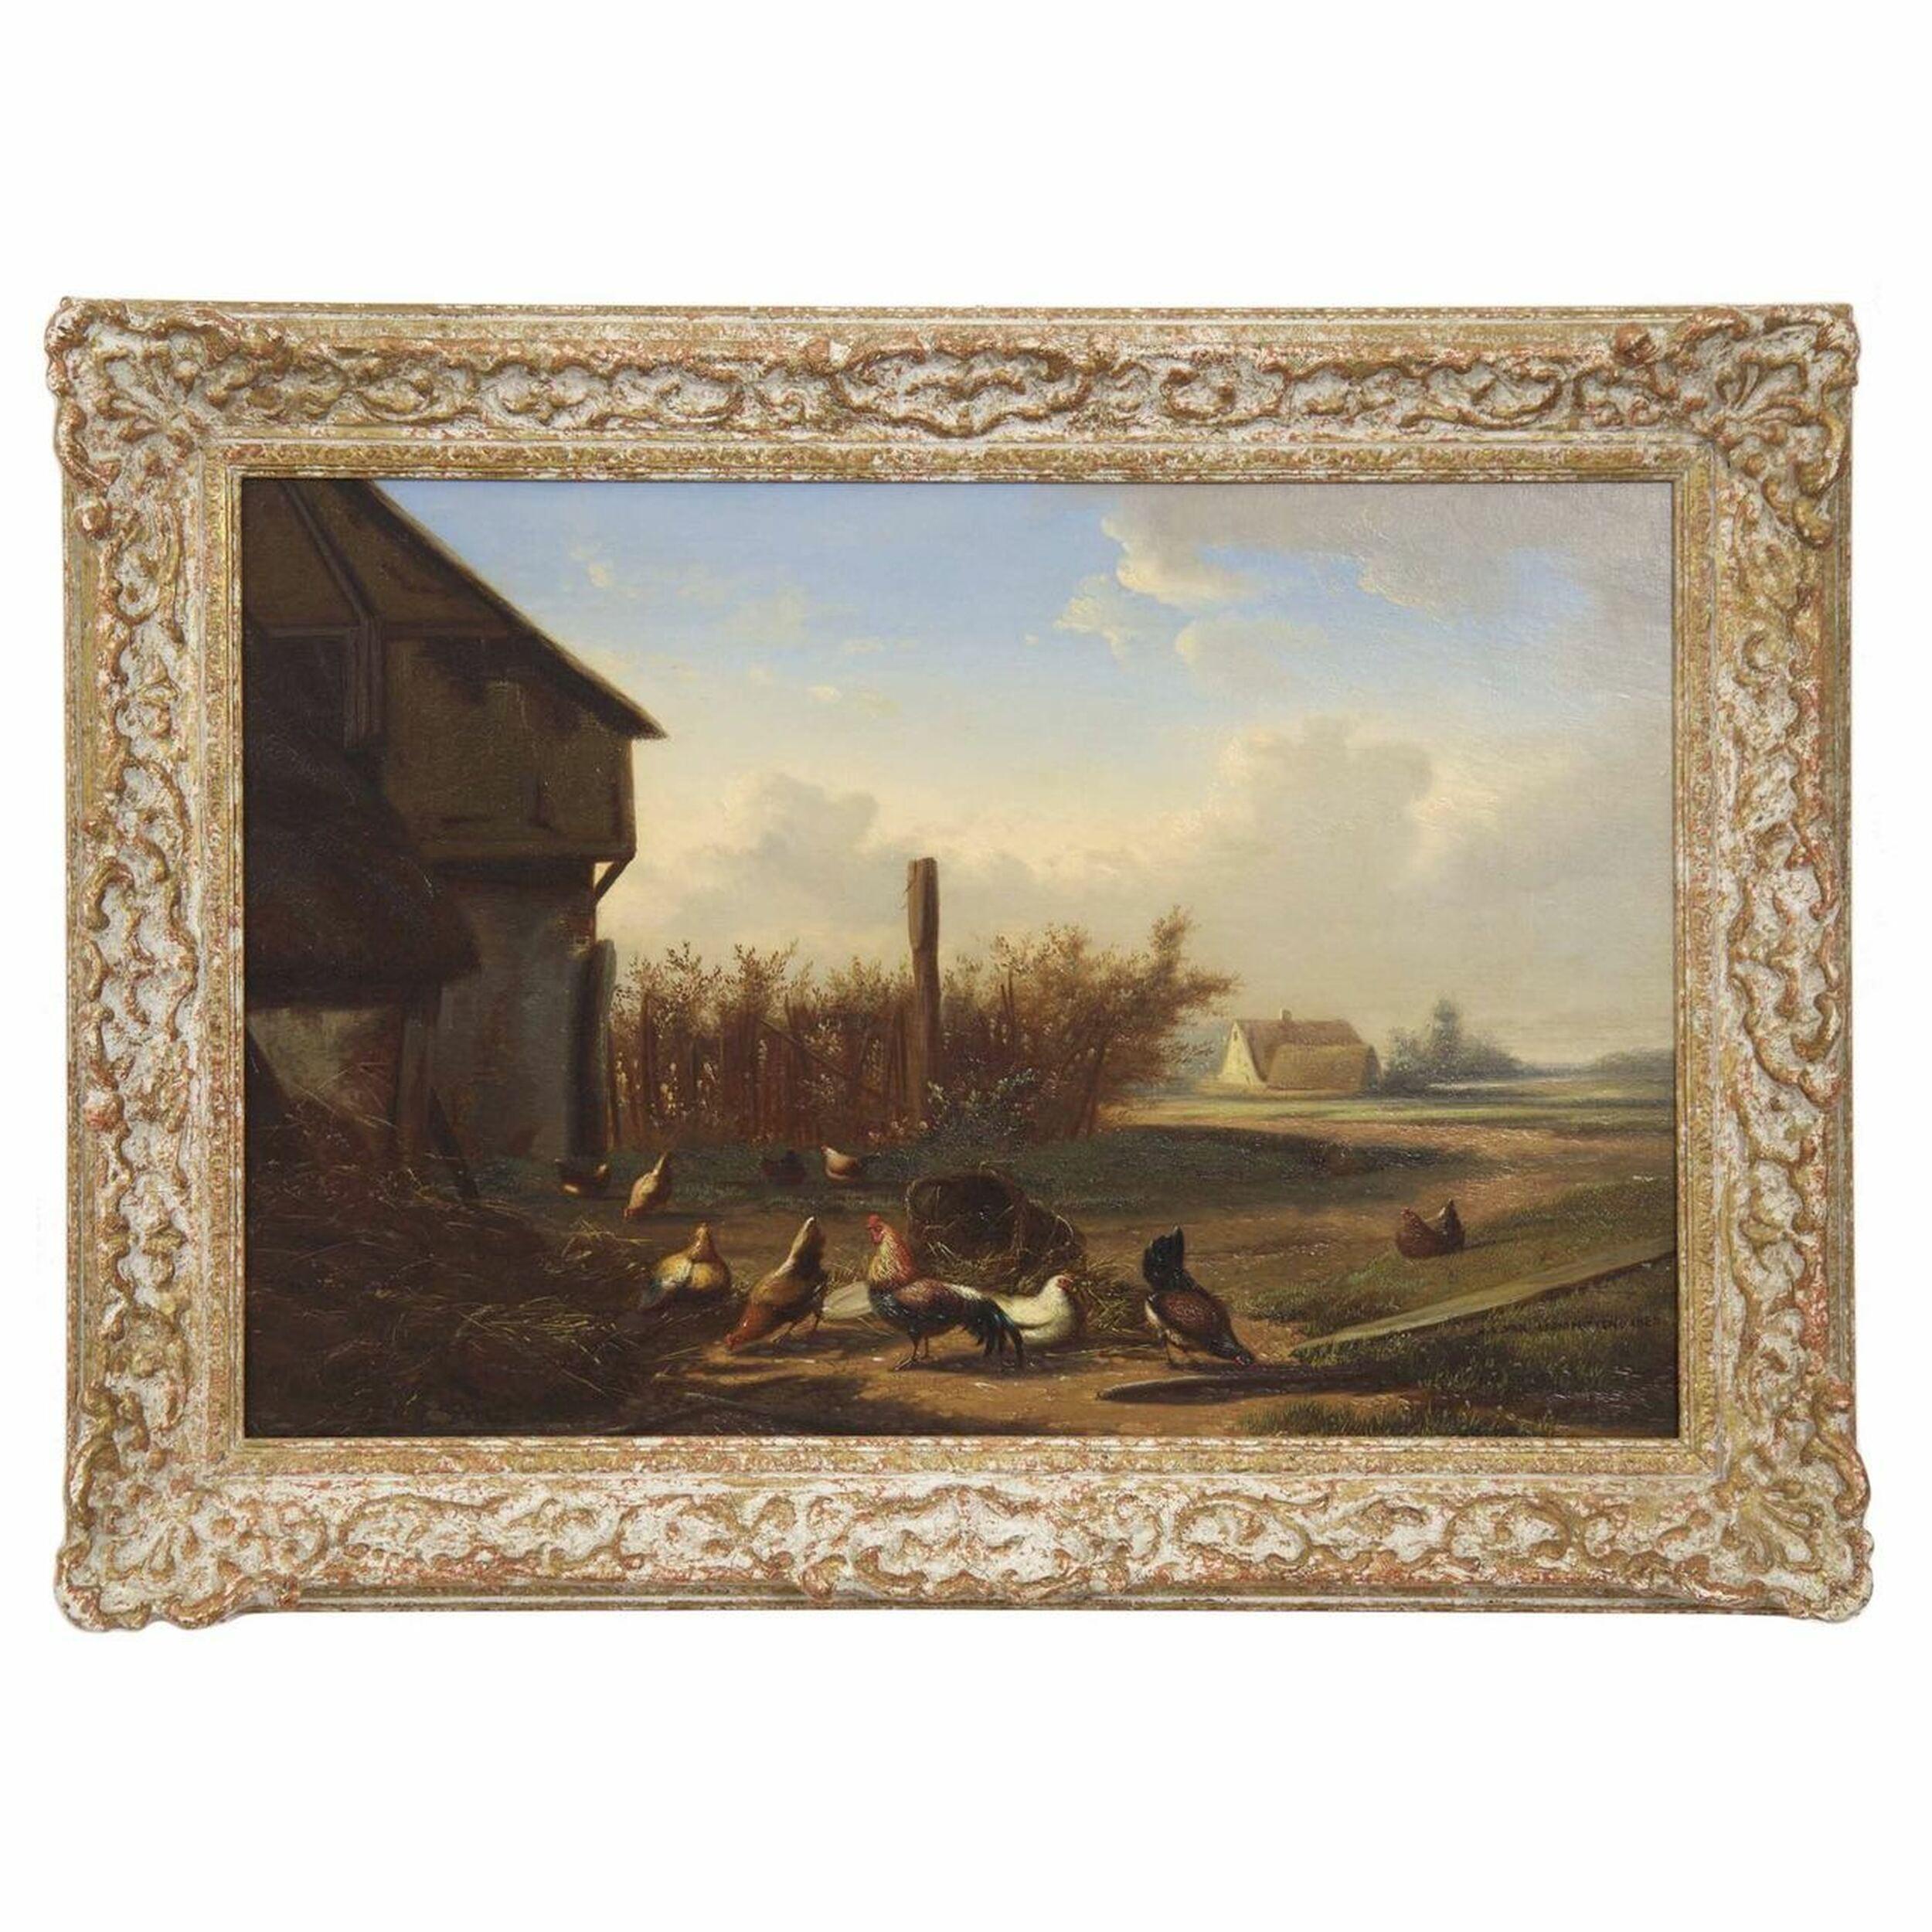 A meticulously painted scene of roosters and hens pecking about in the dirt for grubs and seeds beside a plaster barn with its thatched roofing before large flat pasture and a group of farm houses in the distance, the painting is typical of